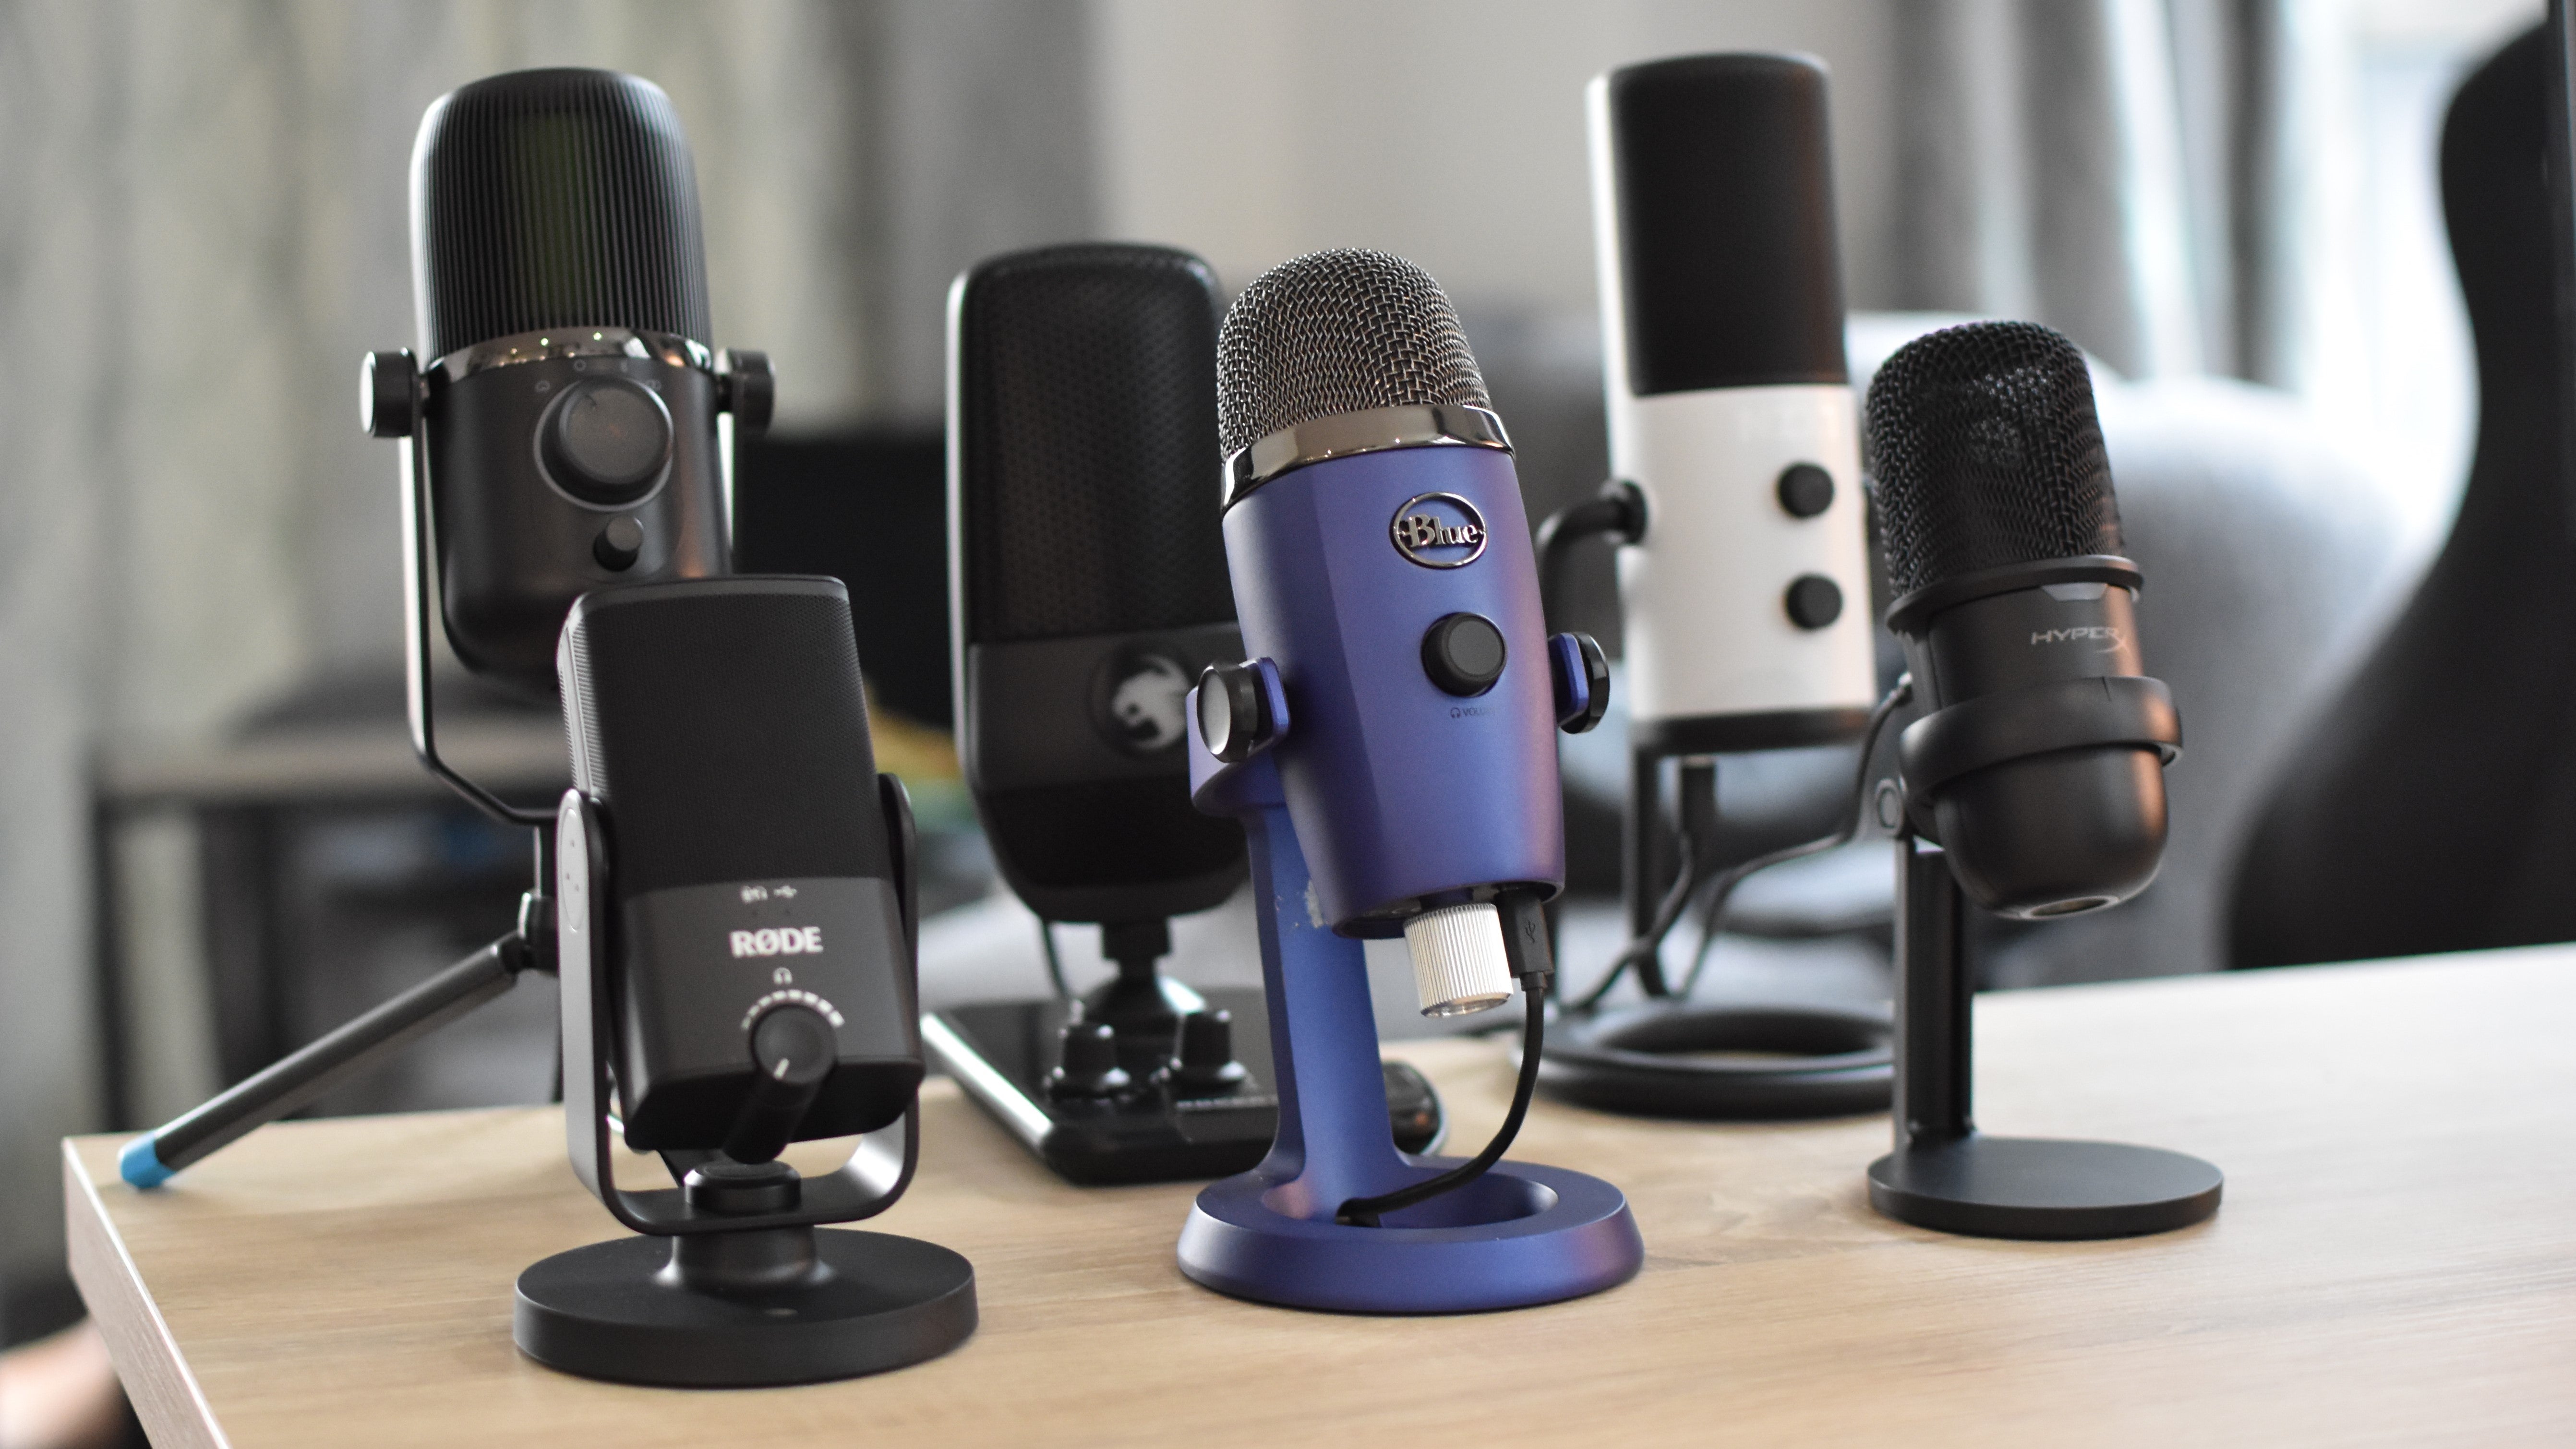 The best gaming microphones for PC: our picks of the best USB mics thumbnail